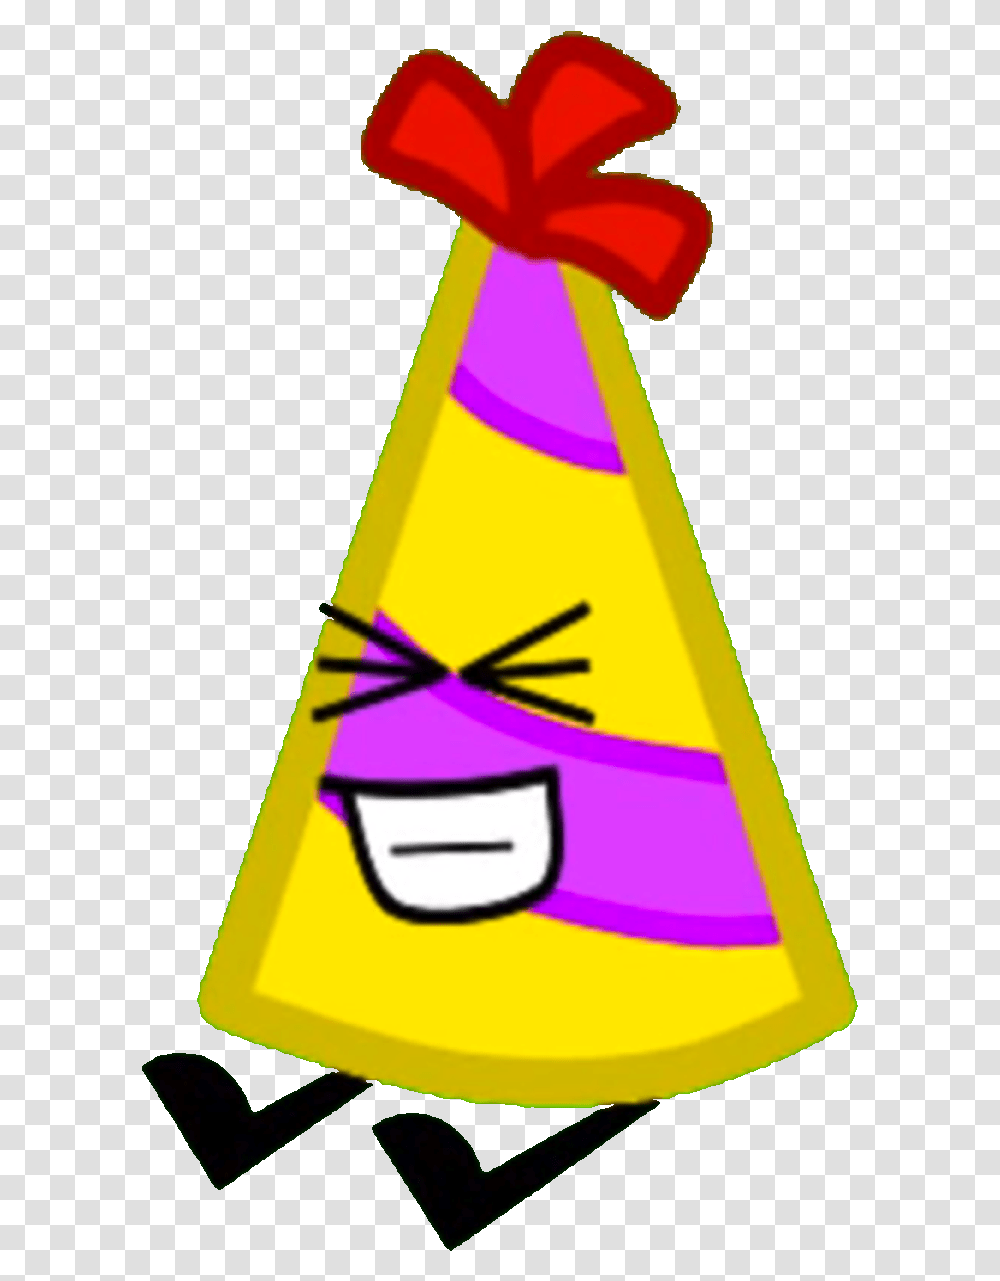 Image Party Hat Brawl Of The Objects, Apparel Transparent Png